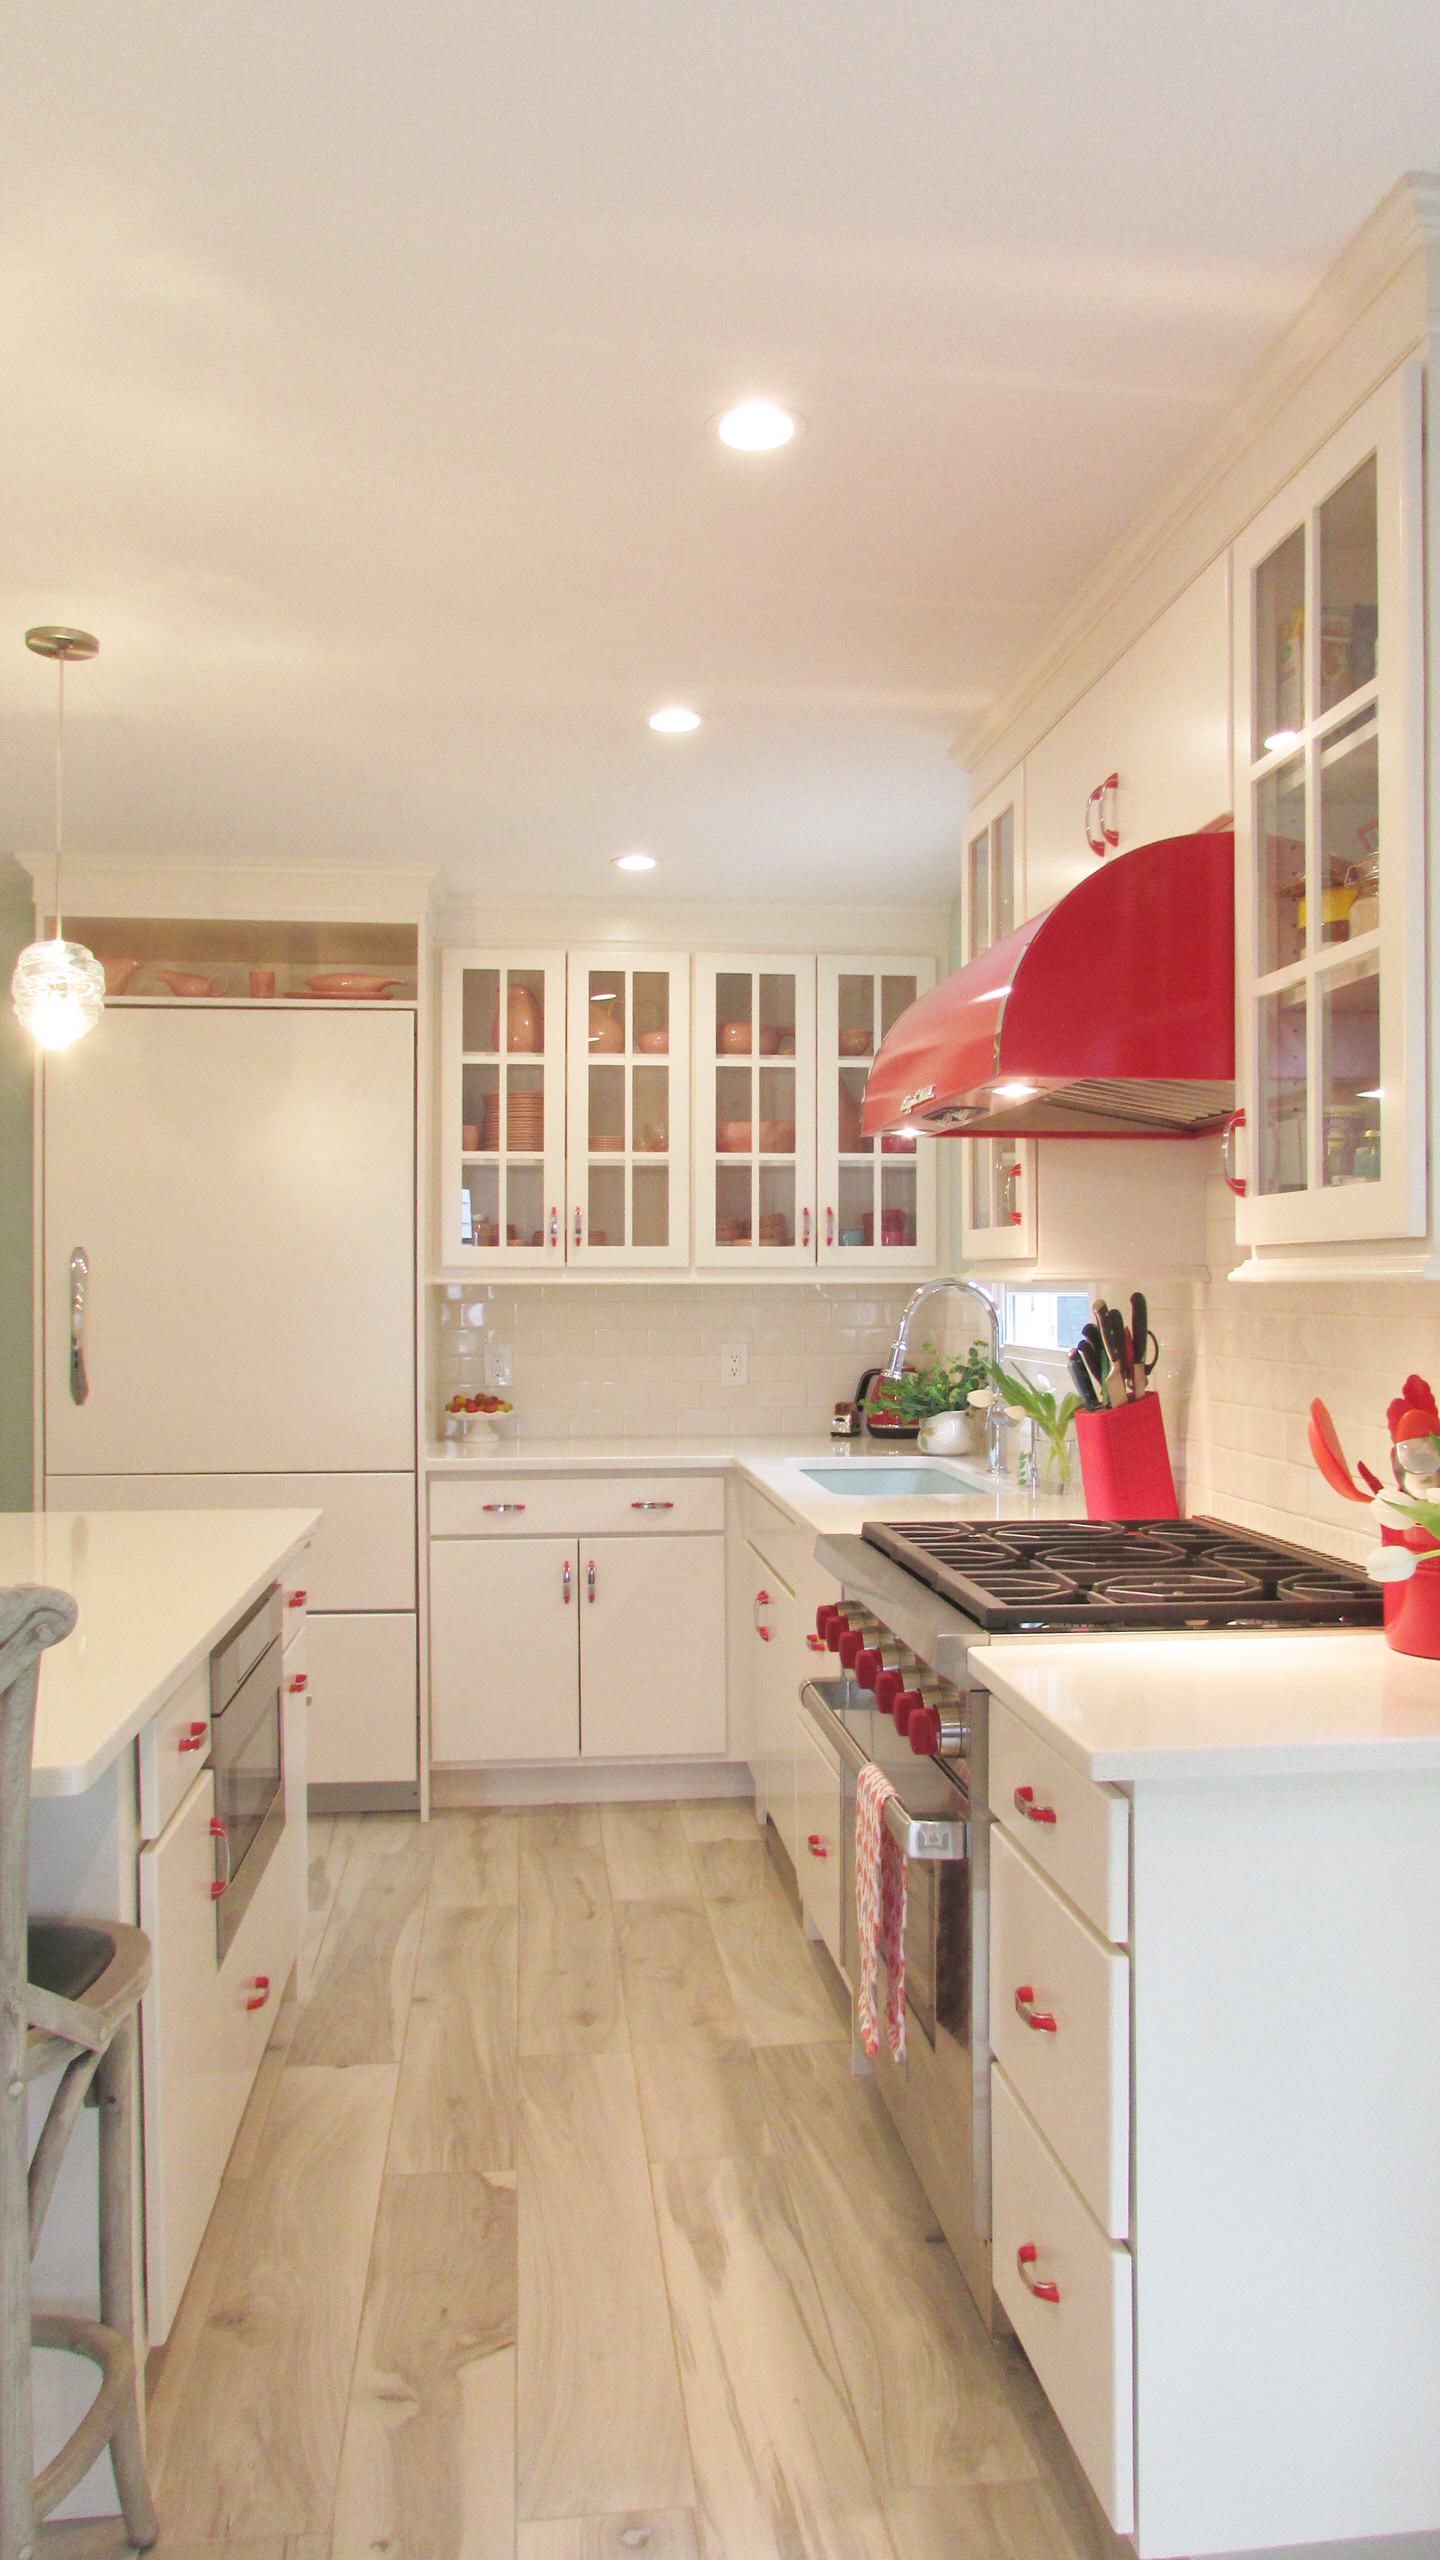 Off-White and Retro Red Accented Kitchen